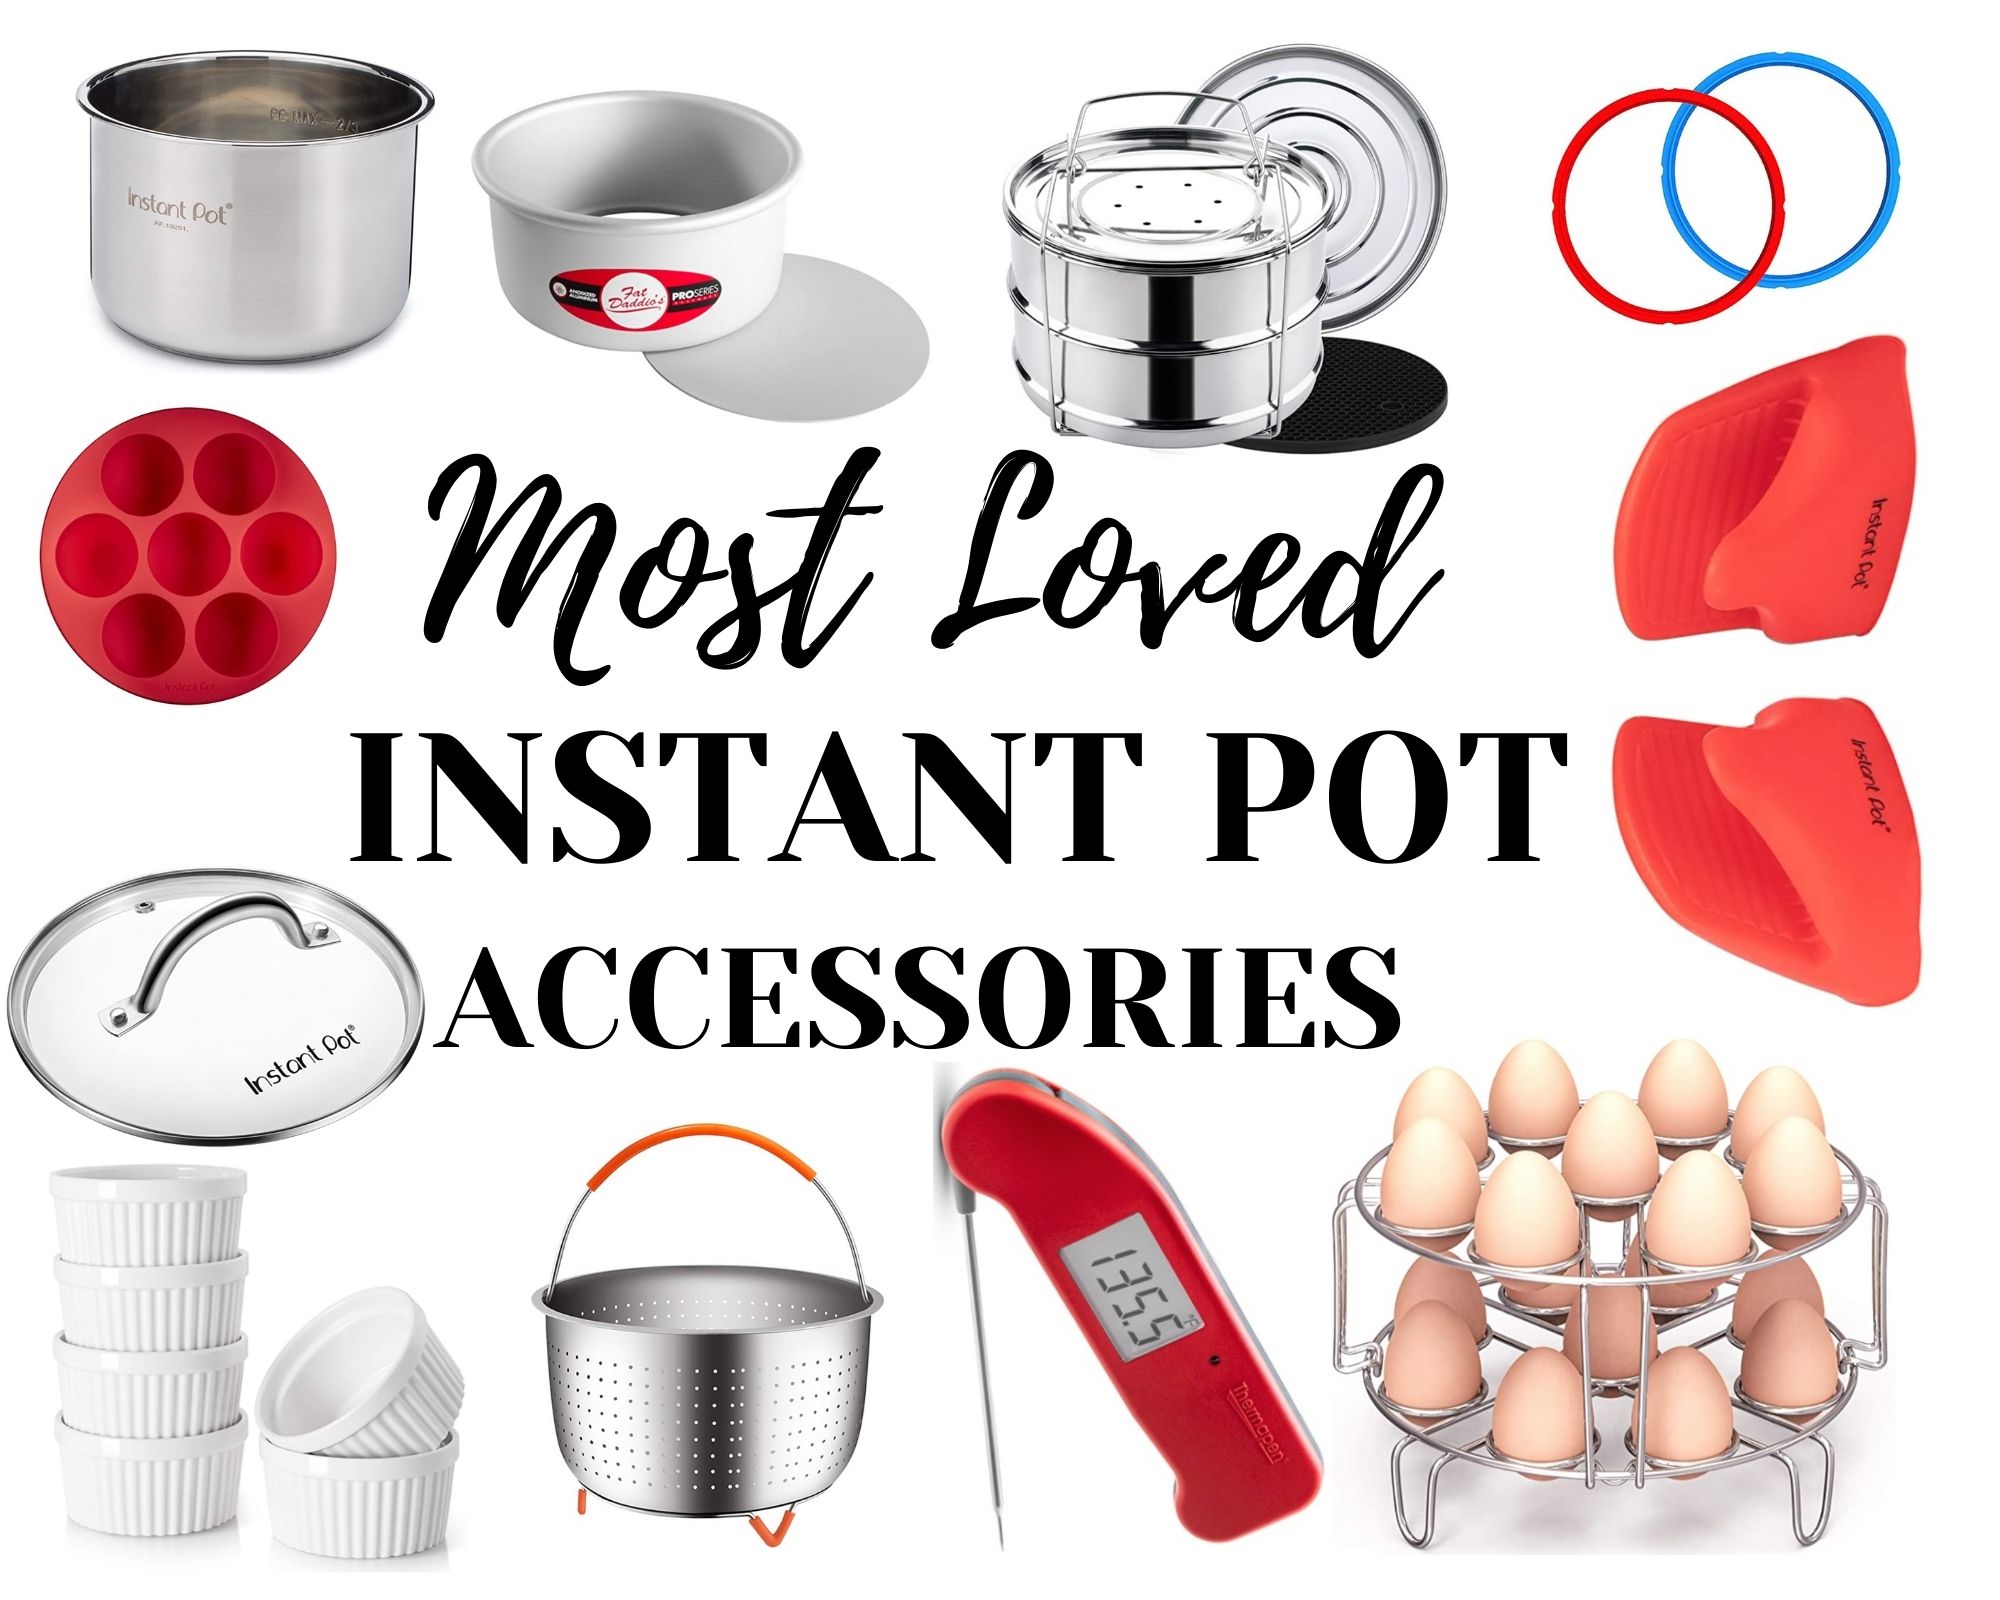 https://pipingpotcurry.com/wp-content/uploads/2021/11/Most-useful-instat-pot-accessories.jpg